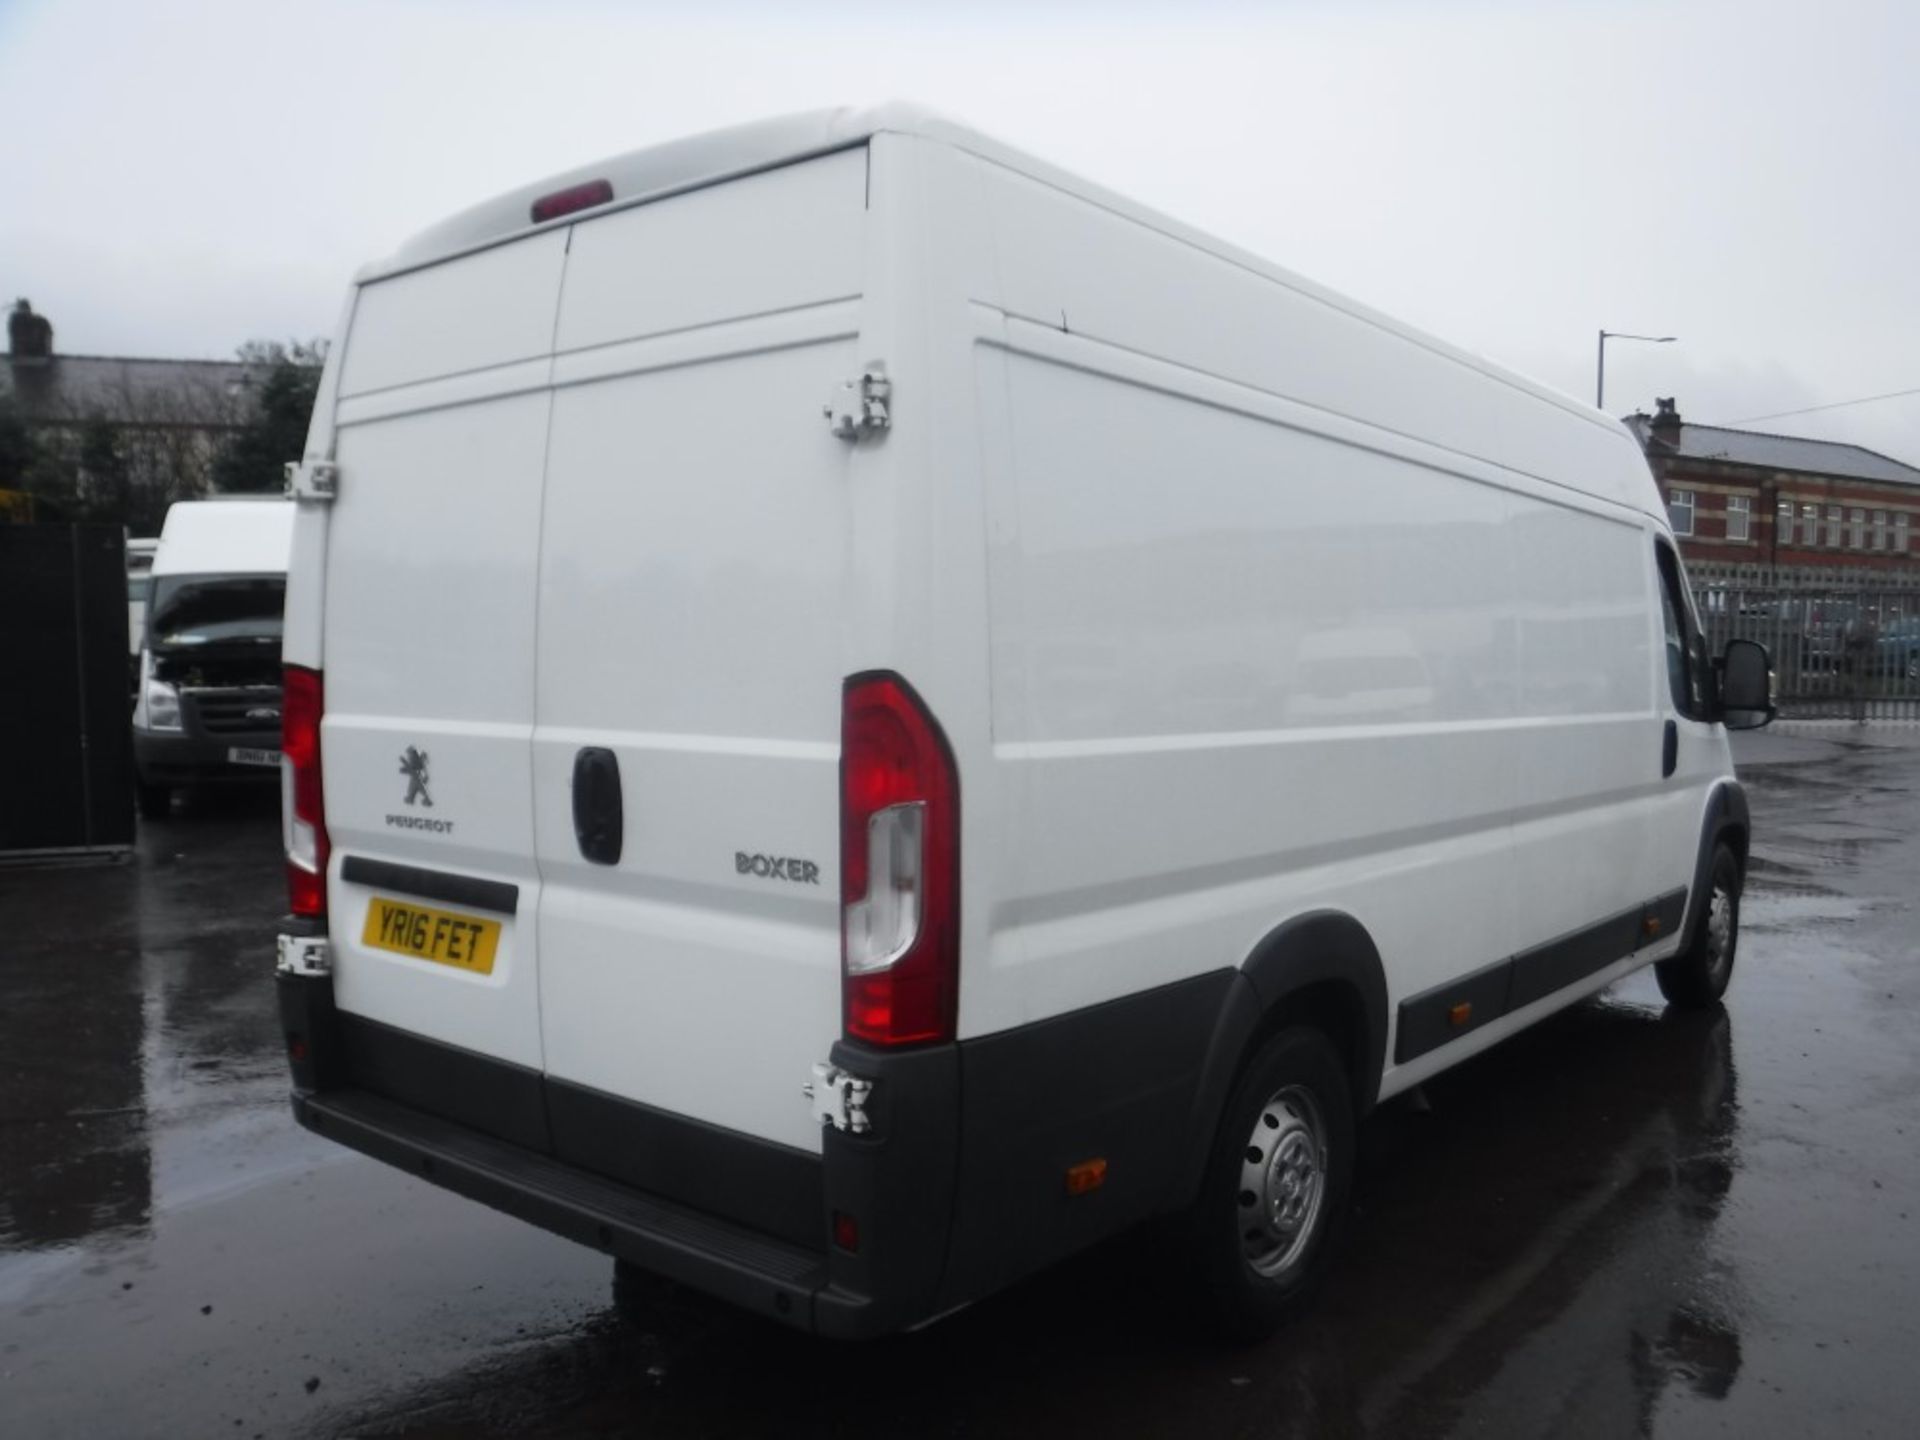 16 reg PEUGEOT BOXER 435 PROFESSIONAL HDI, 1ST REG 06/16, 161590M WARRANTED, V5 HERE, 1 OWNER FROM - Image 4 of 6